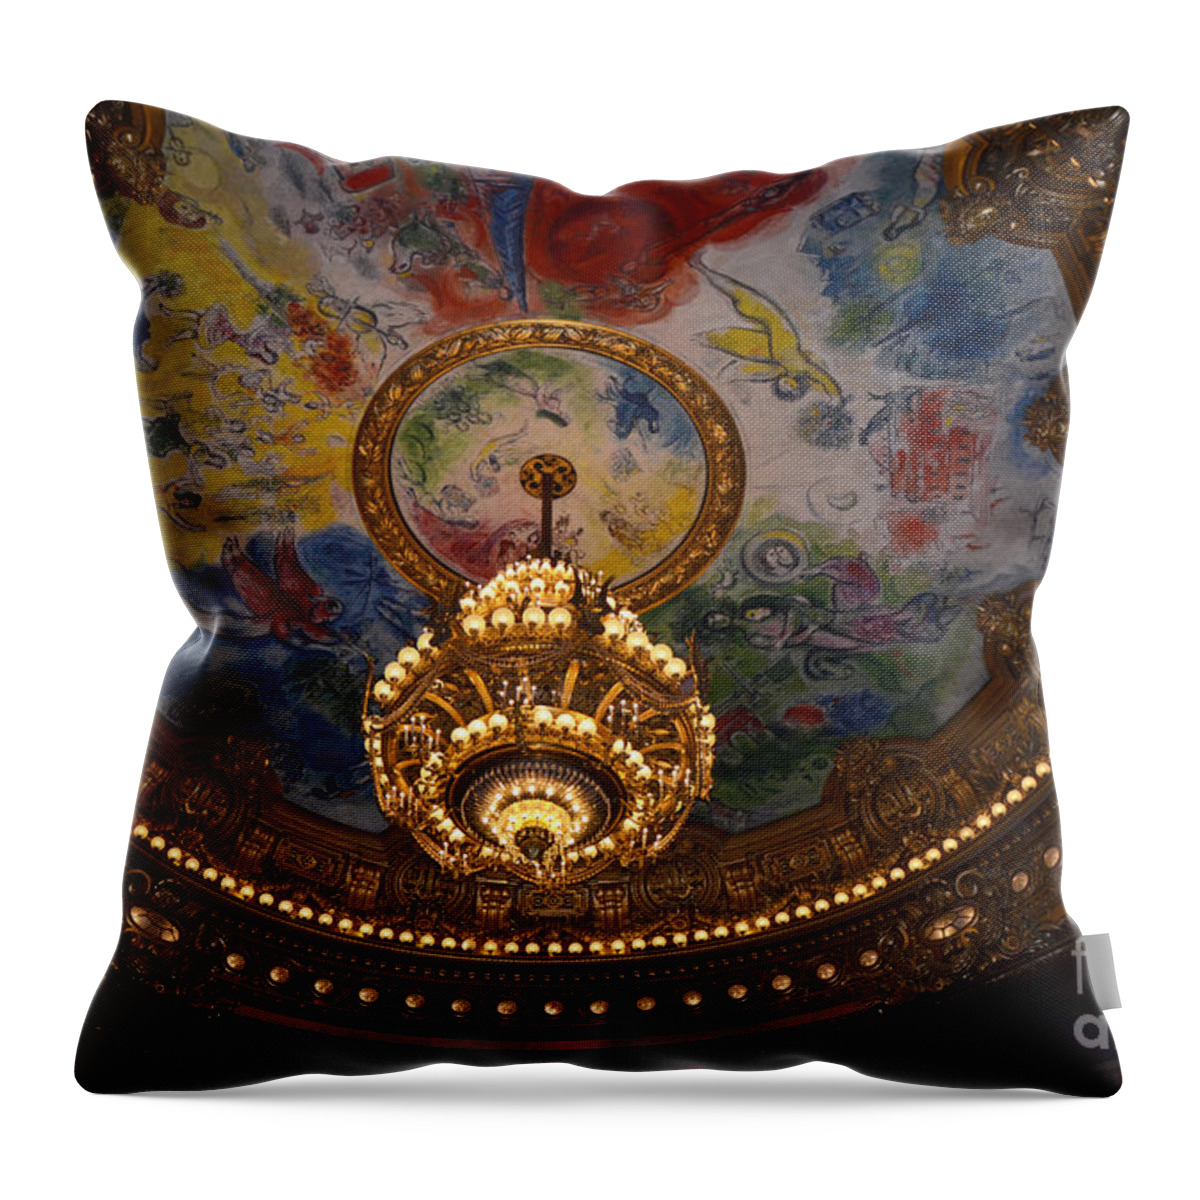 Paris Throw Pillow featuring the photograph Paris Opera des Garnier Ornate Ceiling Architecture and Opera House Chandelier Ceiling by Kathy Fornal